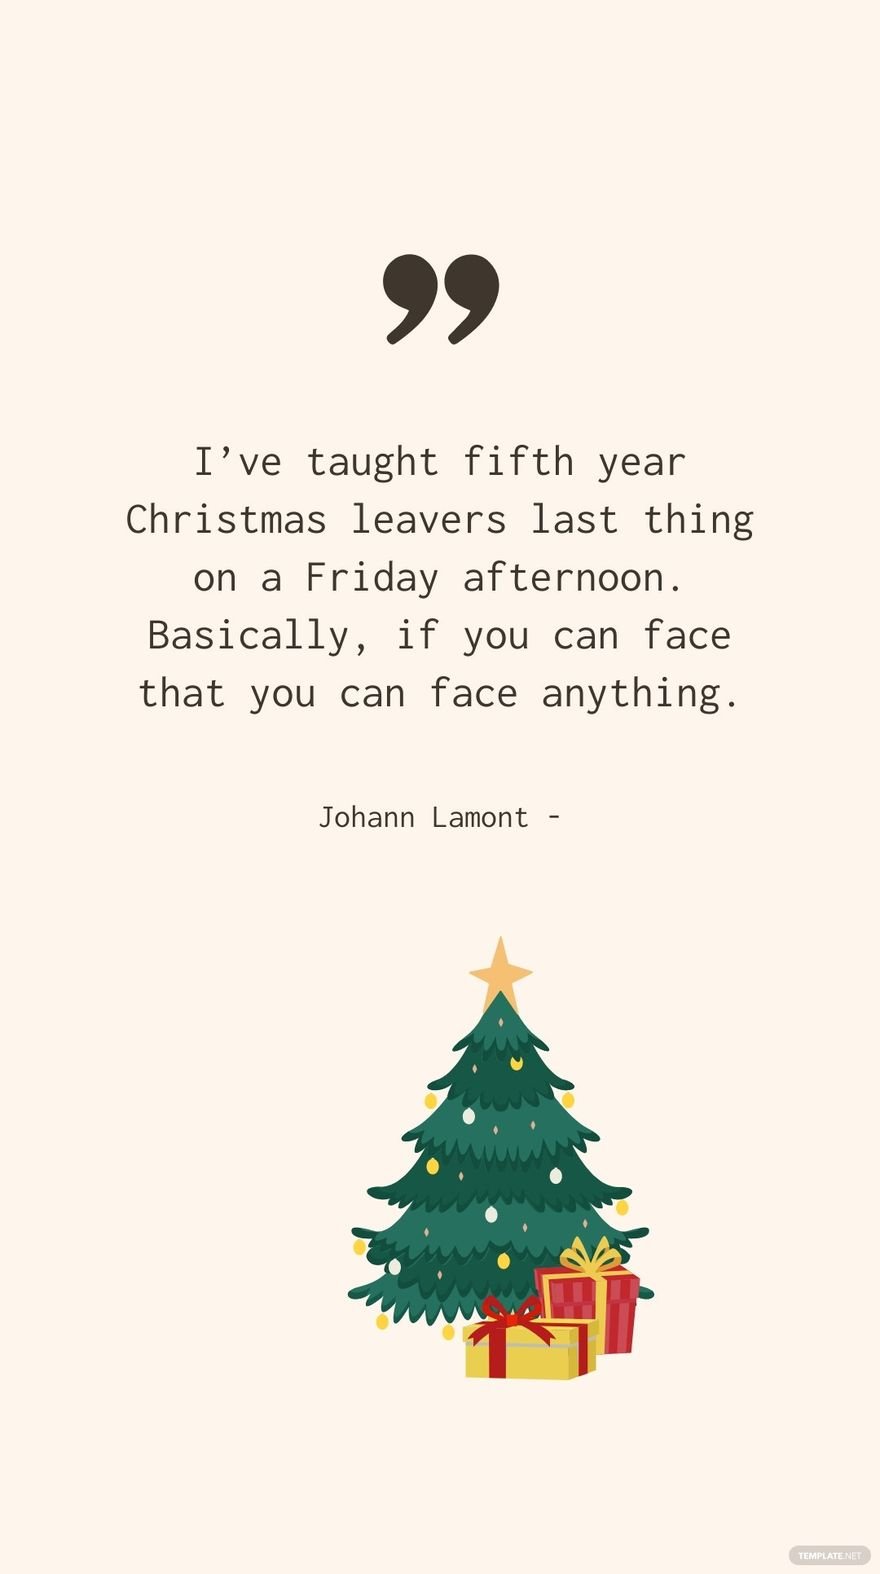 Johann Lamont - I’ve taught fifth year Christmas leavers last thing on a Friday afternoon. Basically, if you can face that you can face anything.